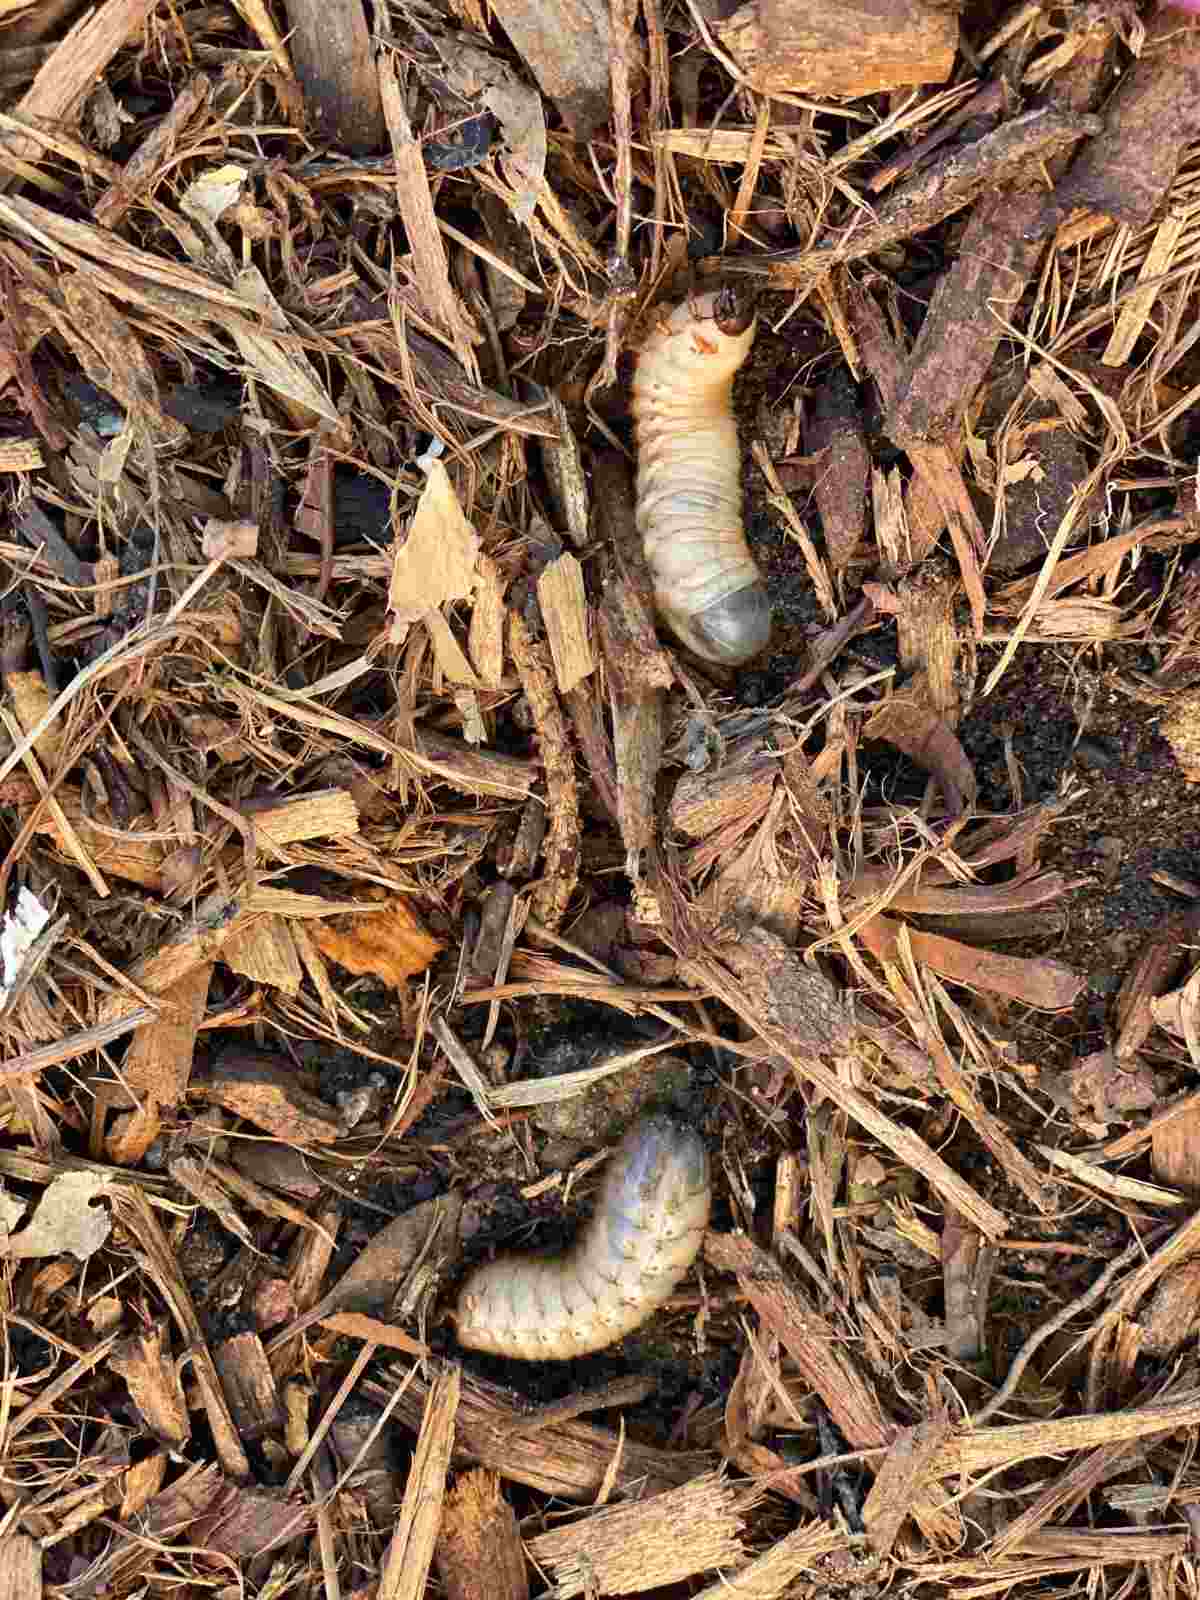 How to Get Rid of Lawn Grubs